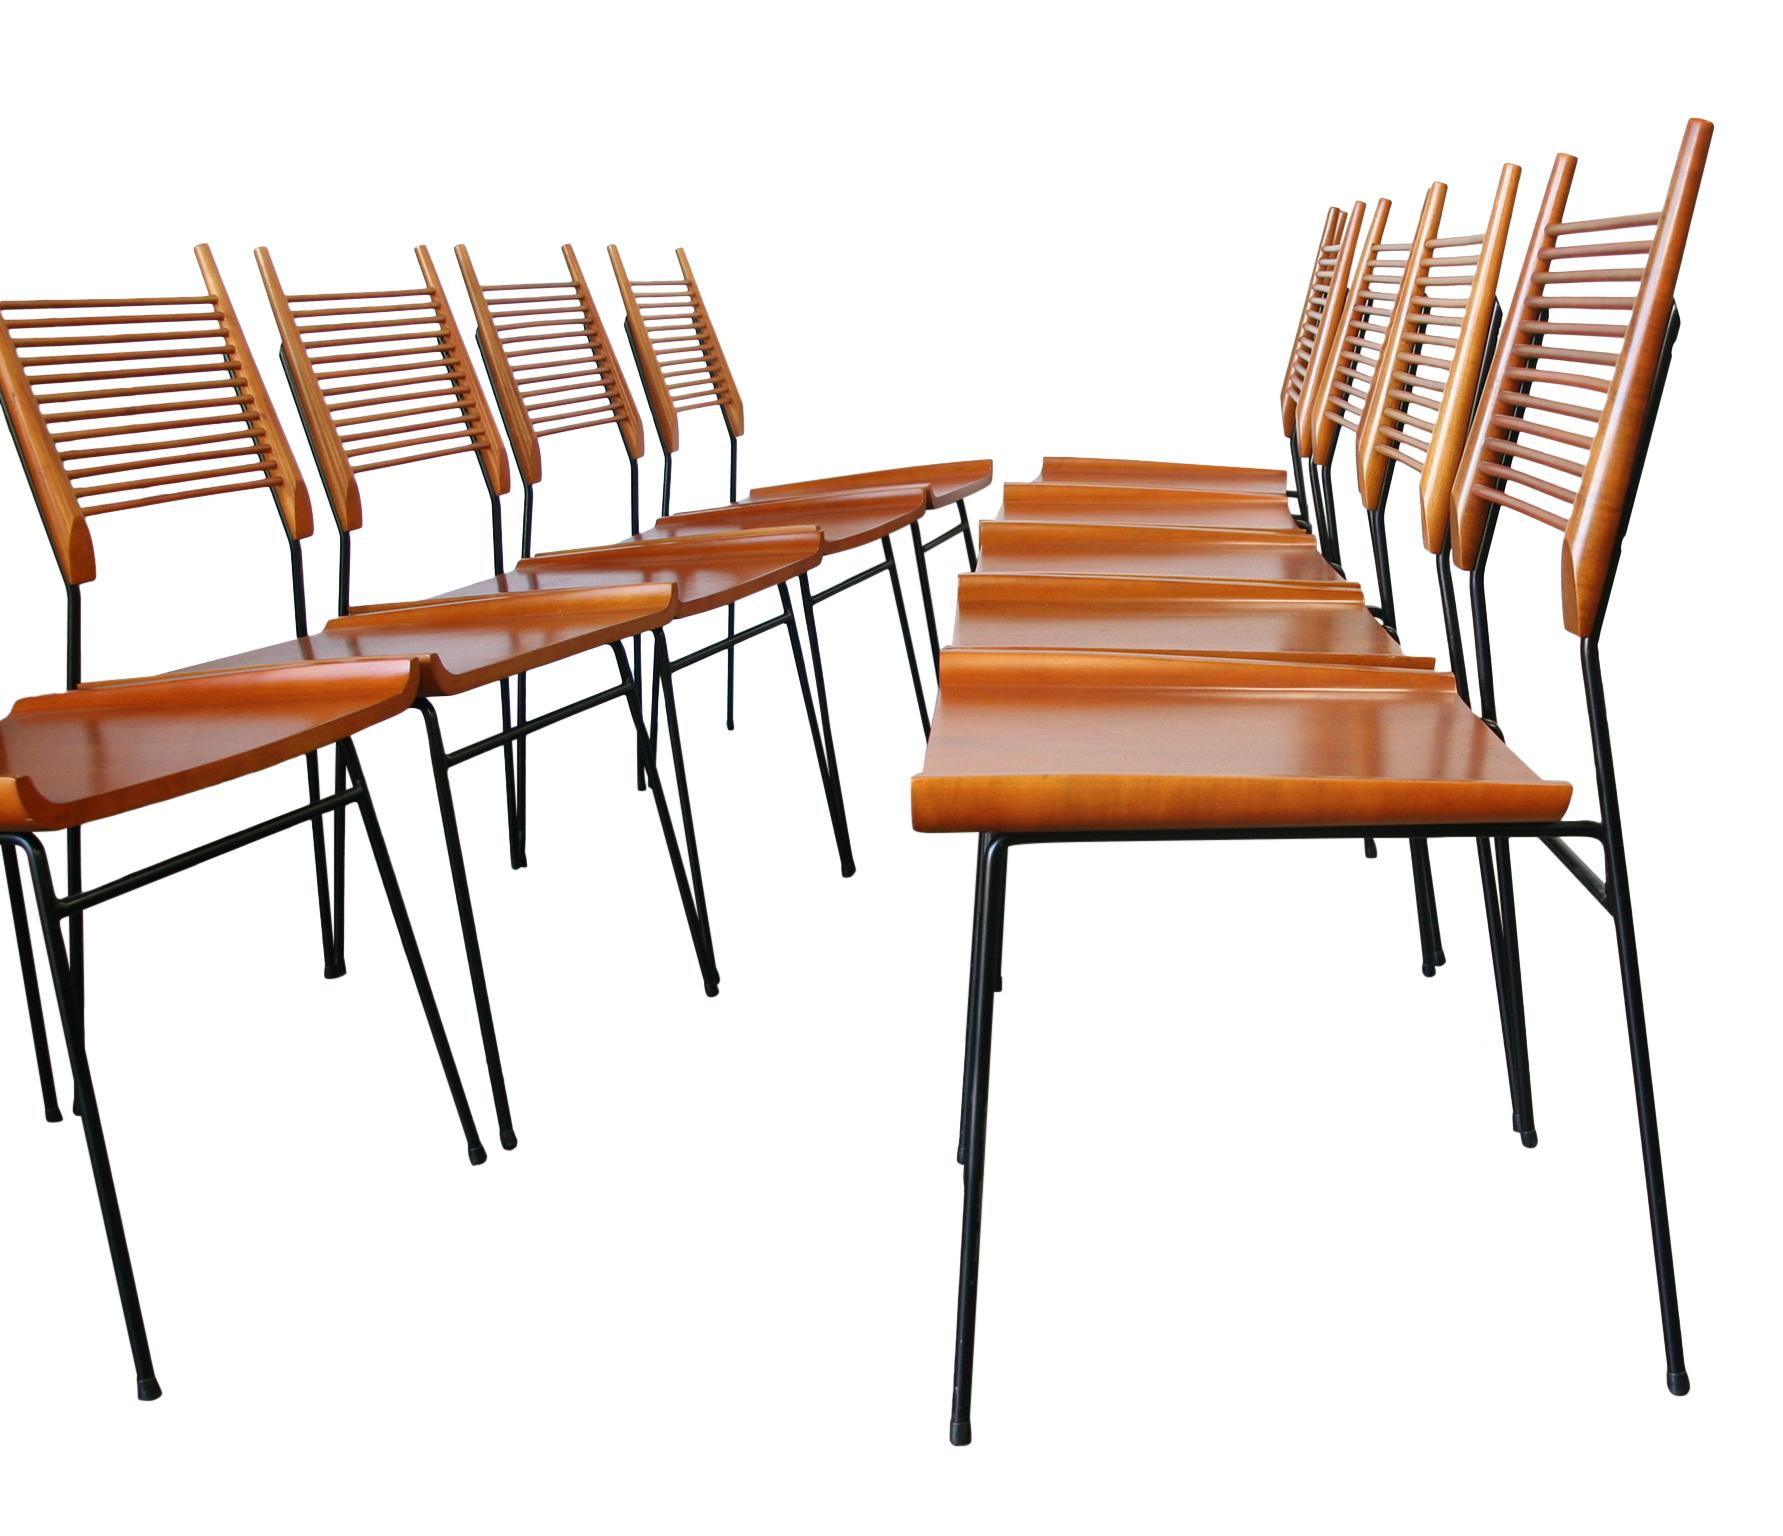 For your consideration are these professionally restored midcentury maple and iron Paul McCobb Planner Group #1533 shovel side dining chairs. Solid maple seat and Minimalist spindle backrest attached to an Iron base. Each chair is fully restored